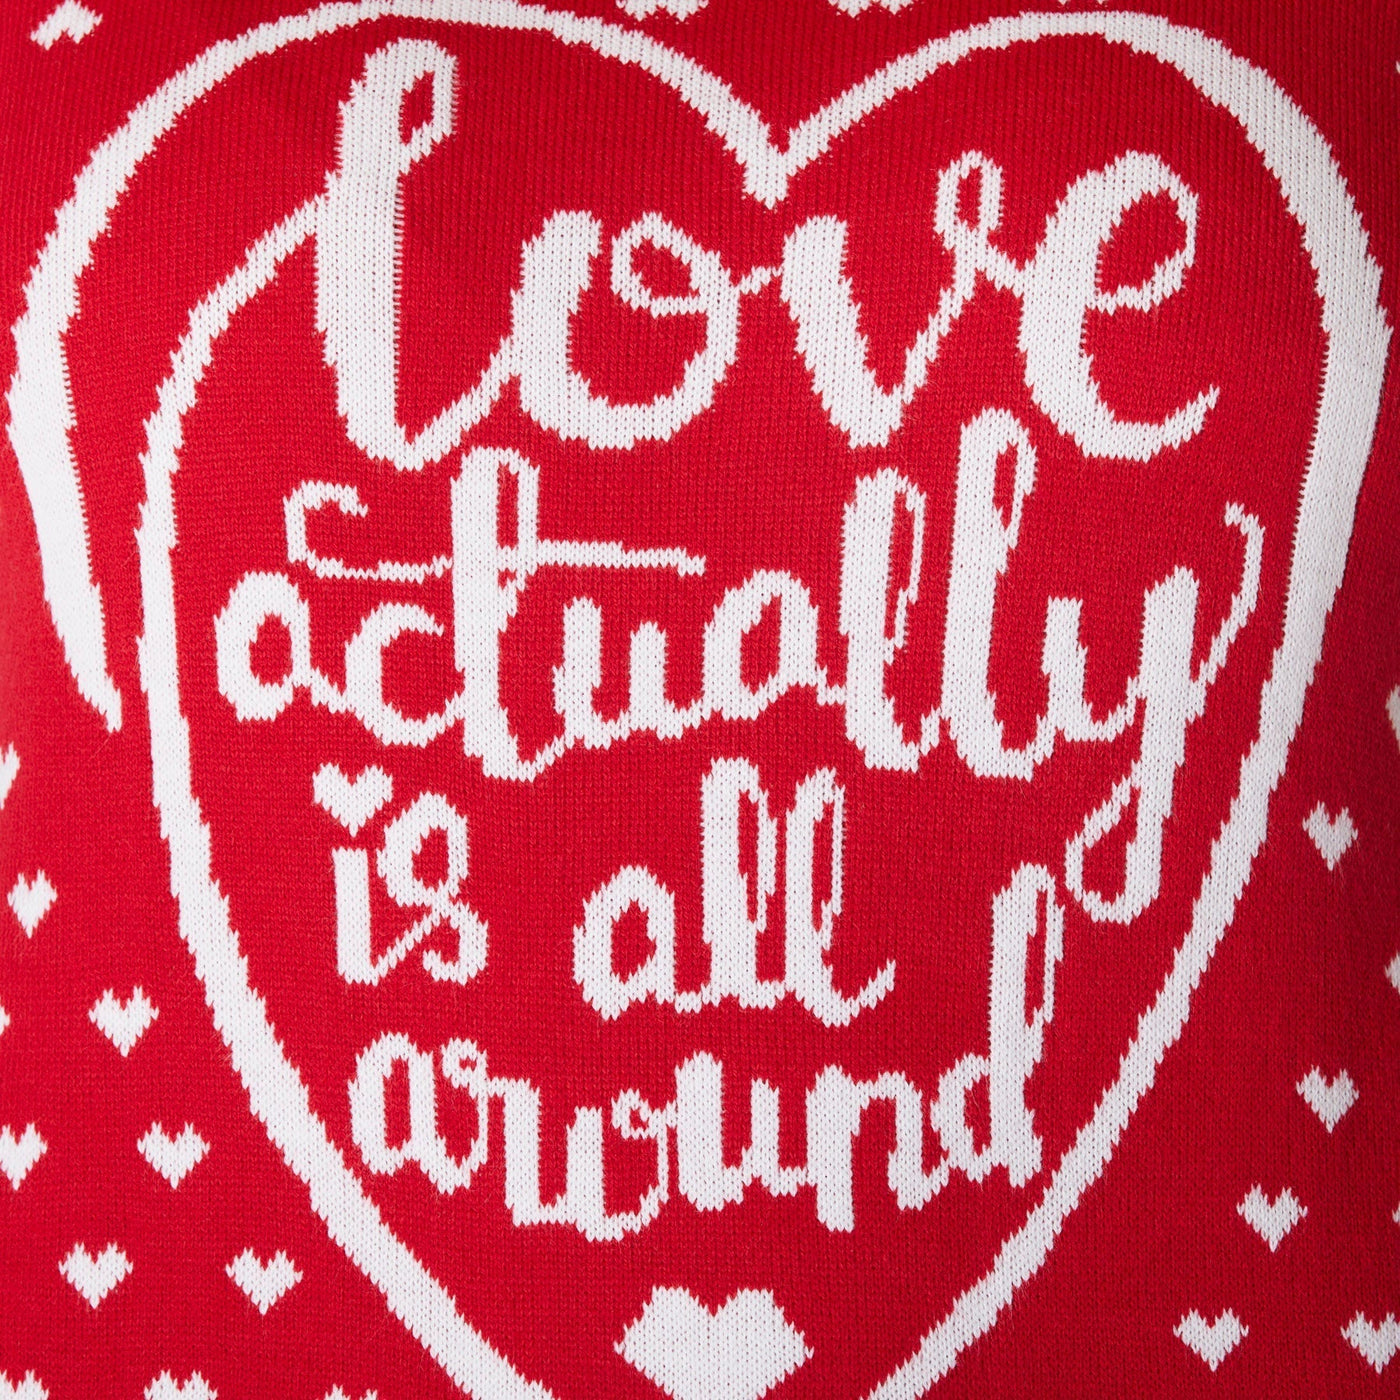 Love actually is all around Julesweater Herre